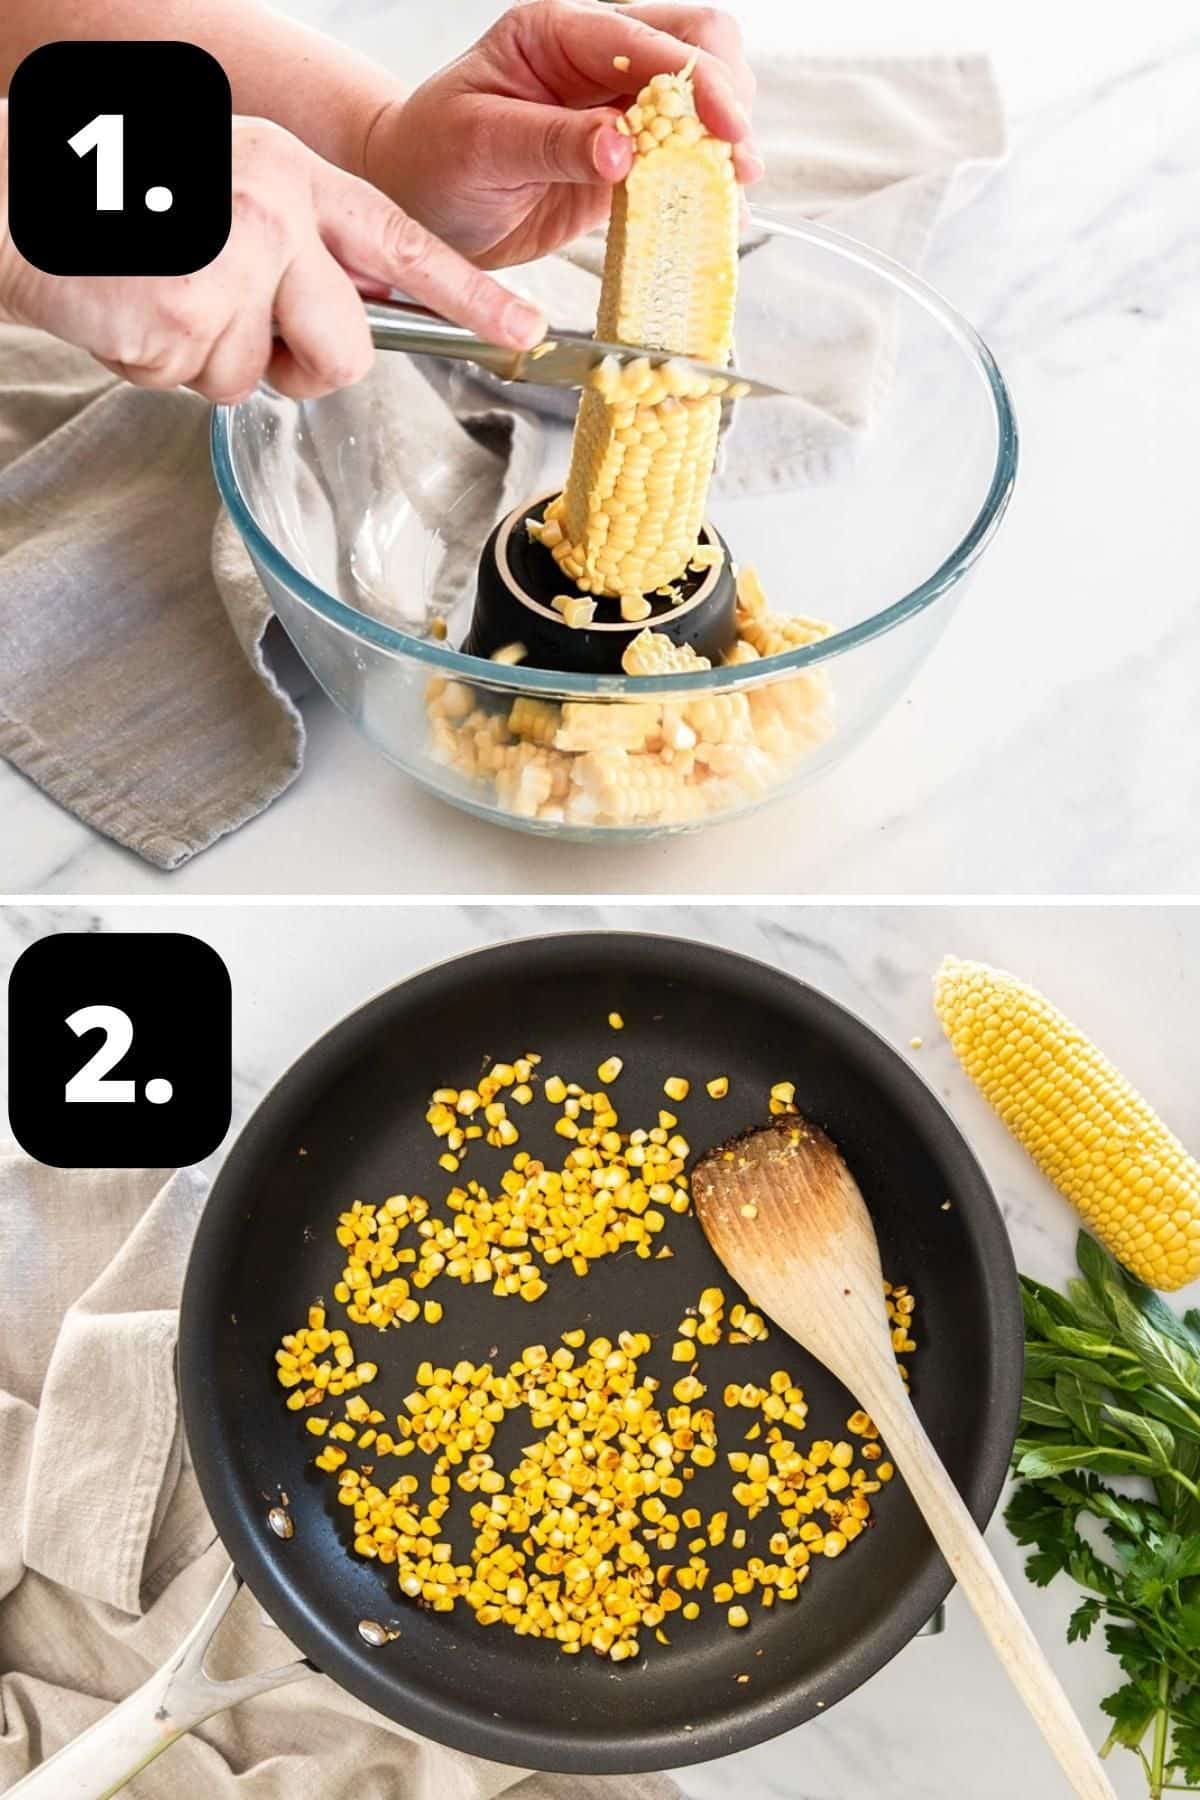 Steps 1-2 of preparing this recipe: removing the corn kernels from the cob and sautéing in a frying pan.